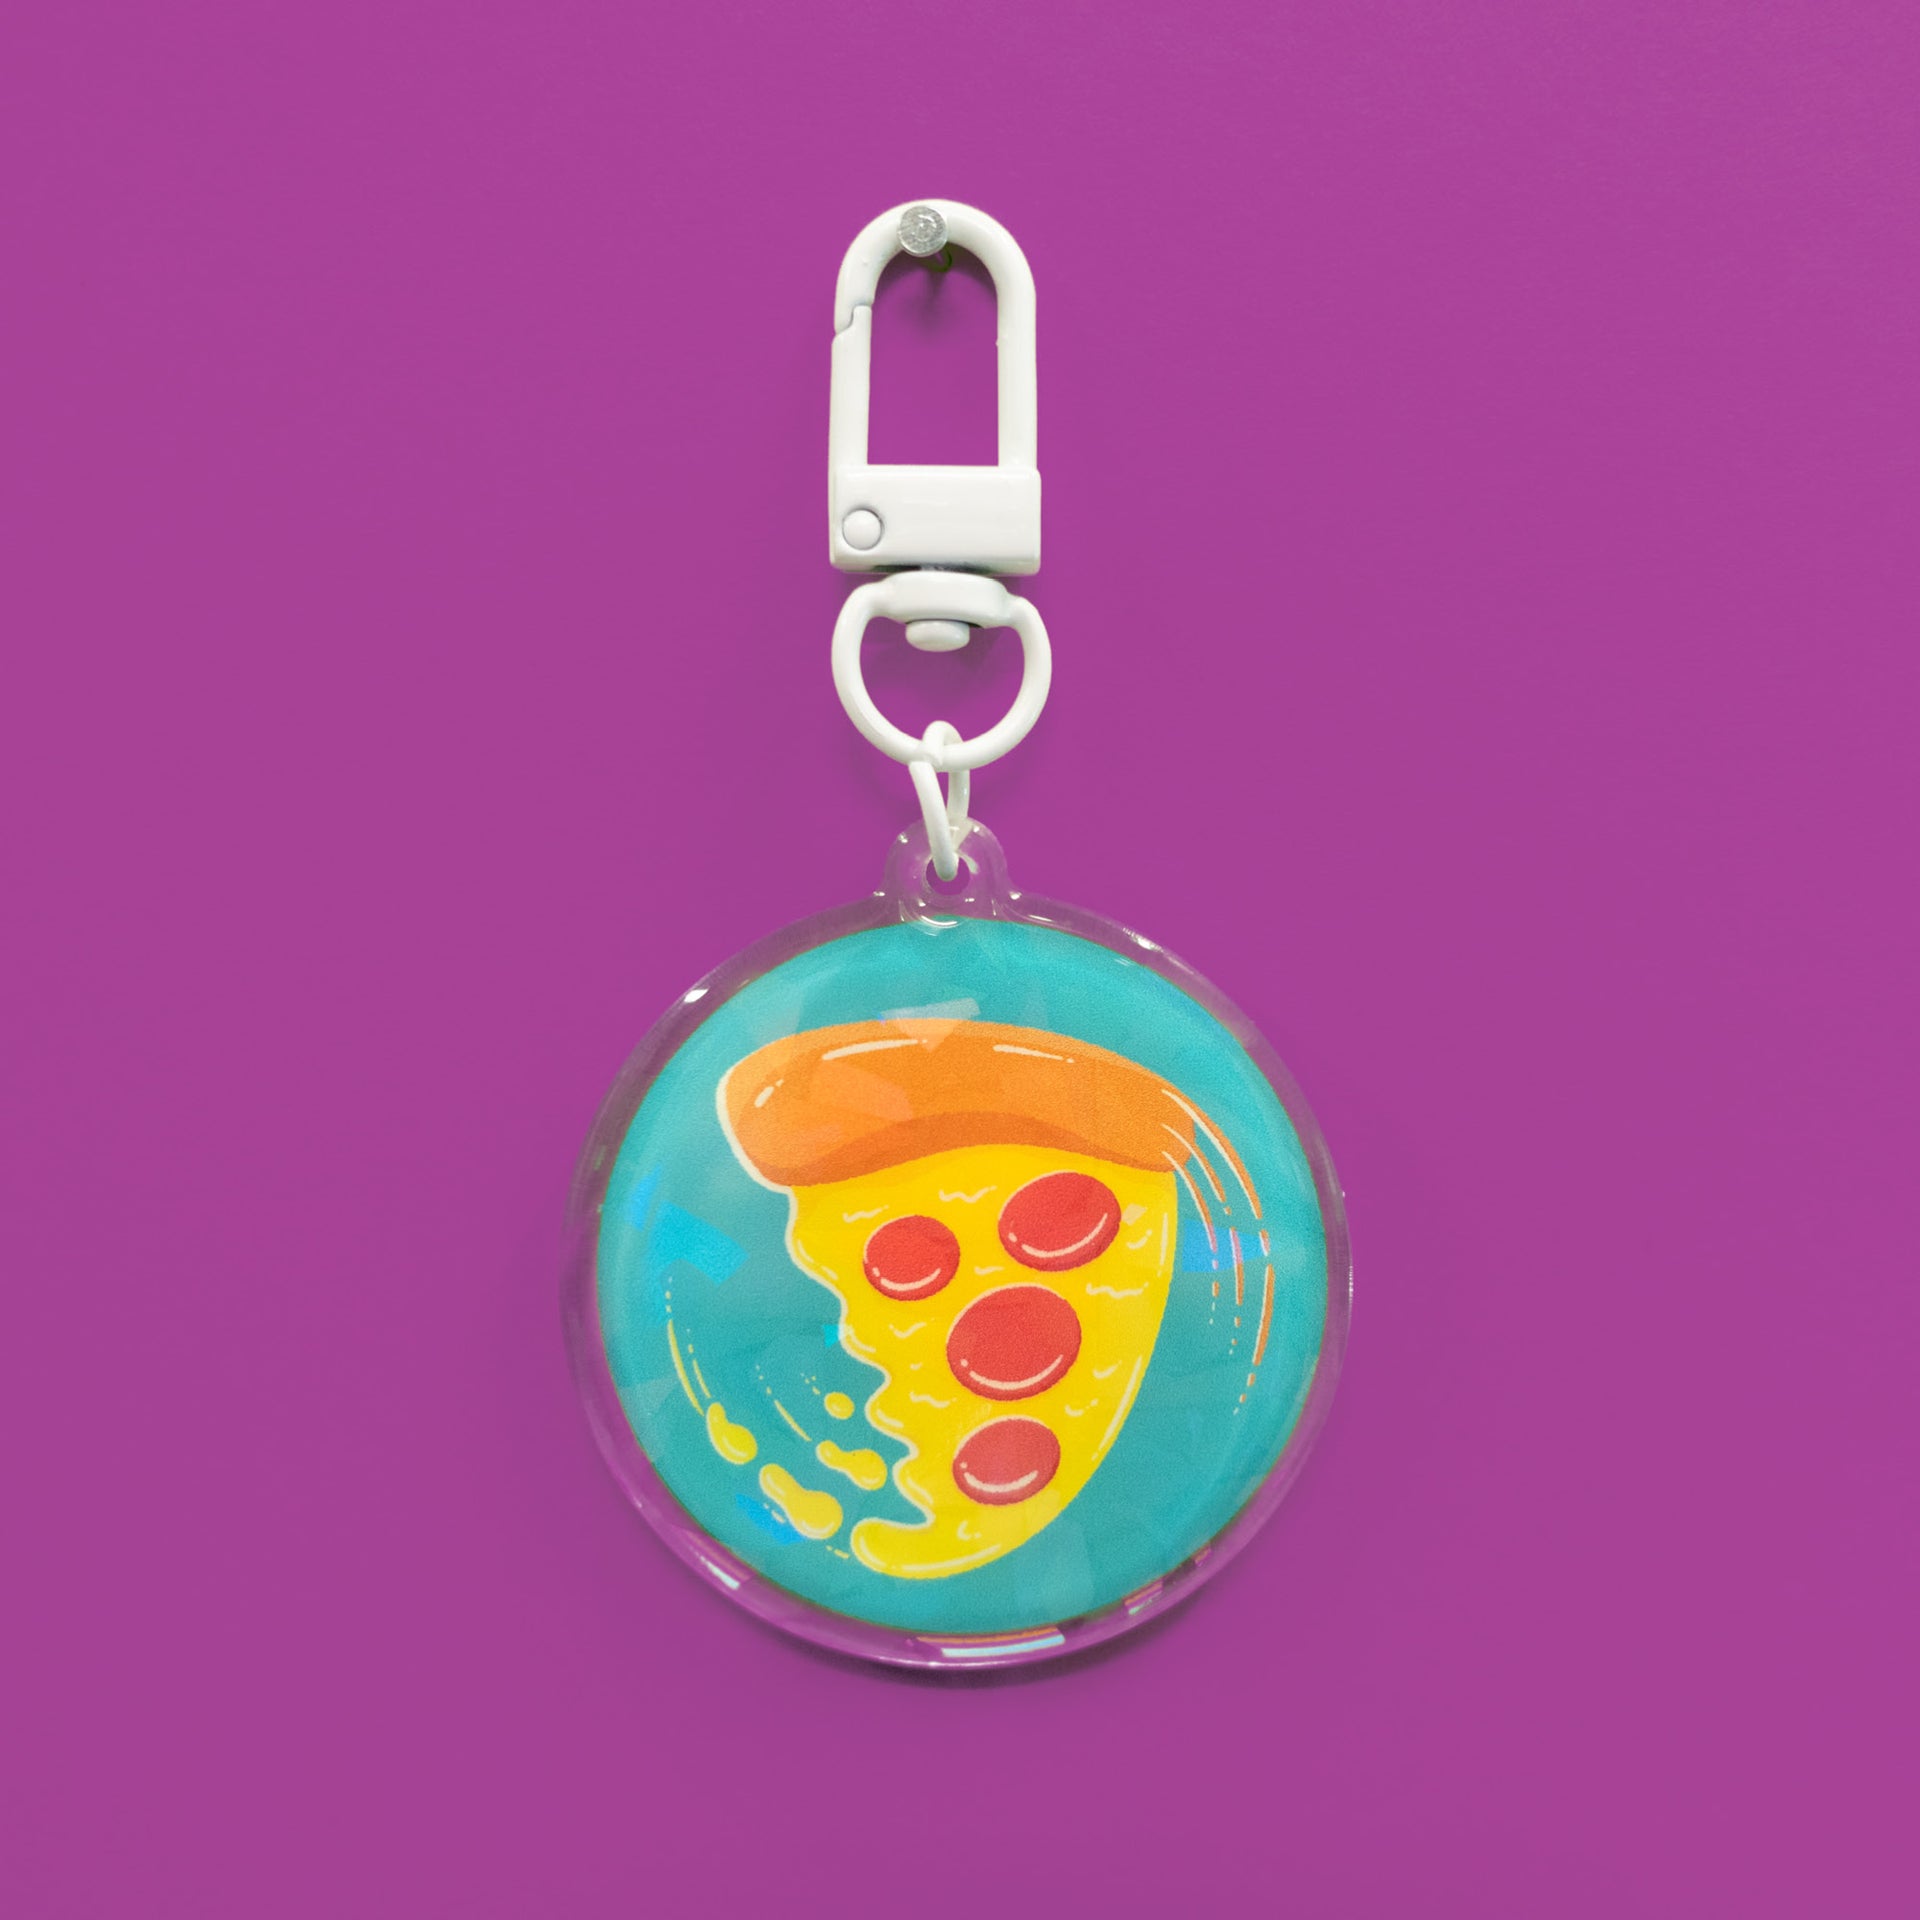 swirling pizza art on a circular holographic keychain